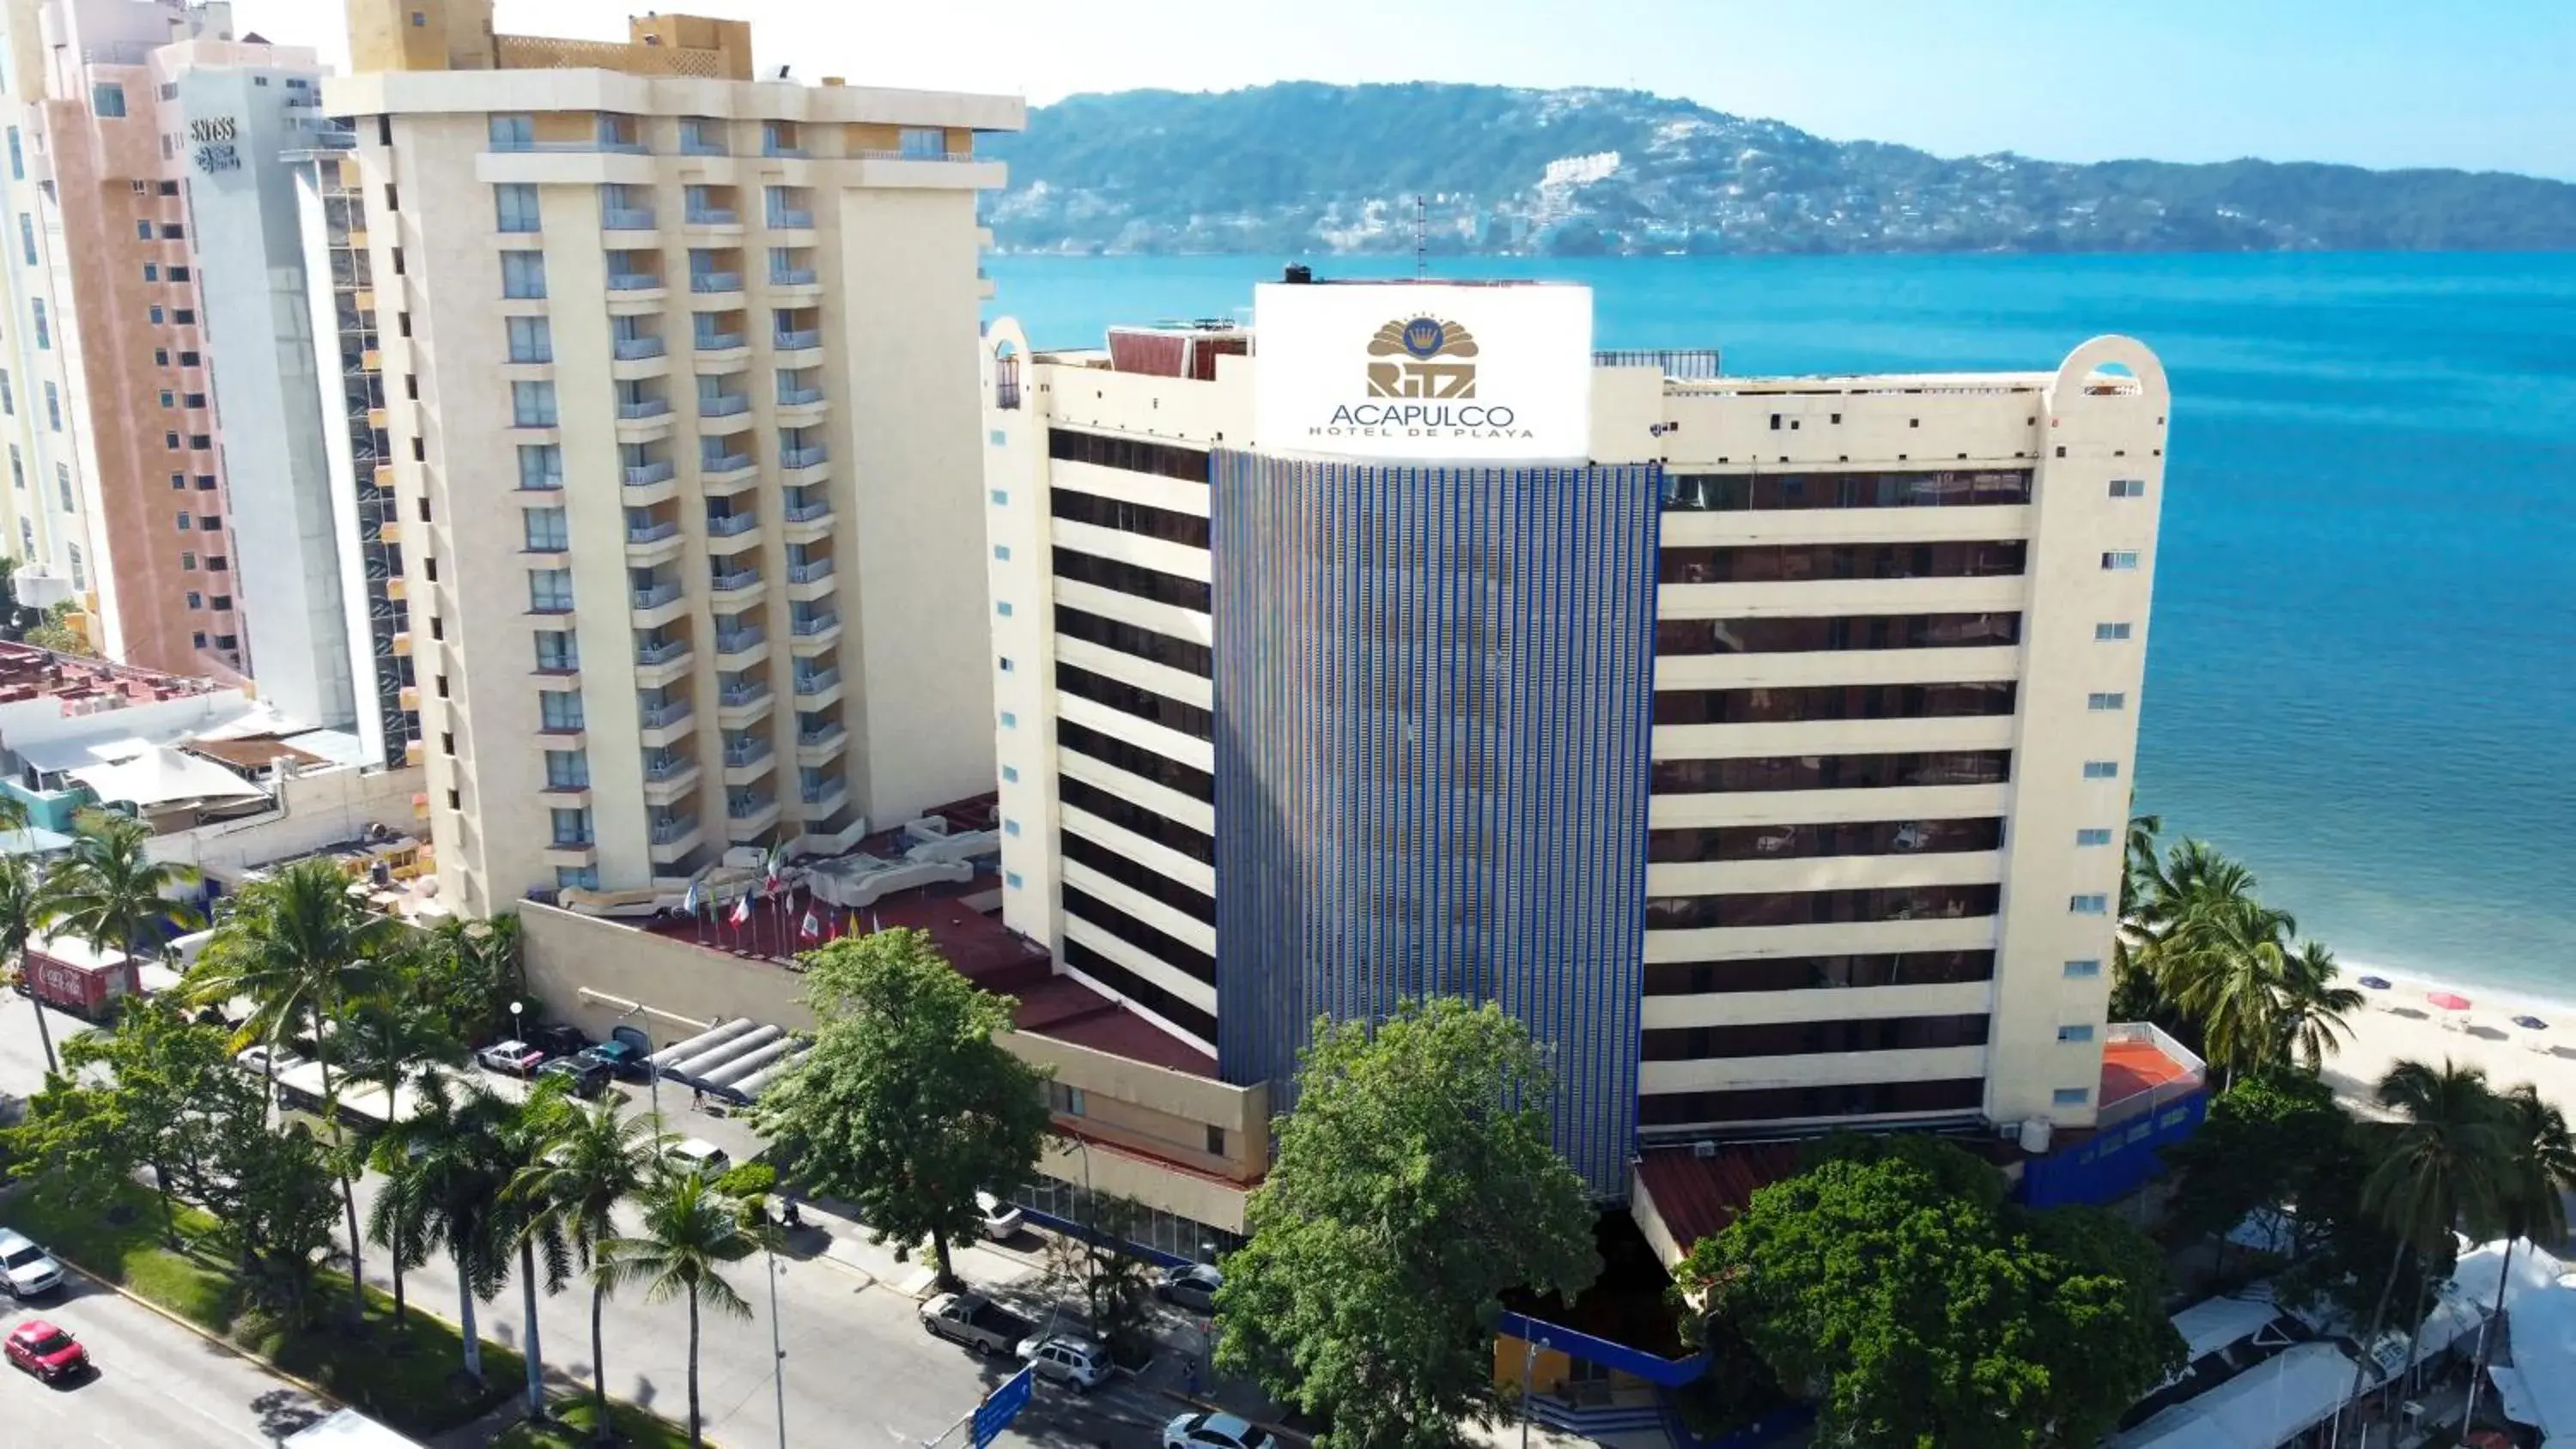 Bird's eye view, Property Building in Ritz Acapulco All Inclusive